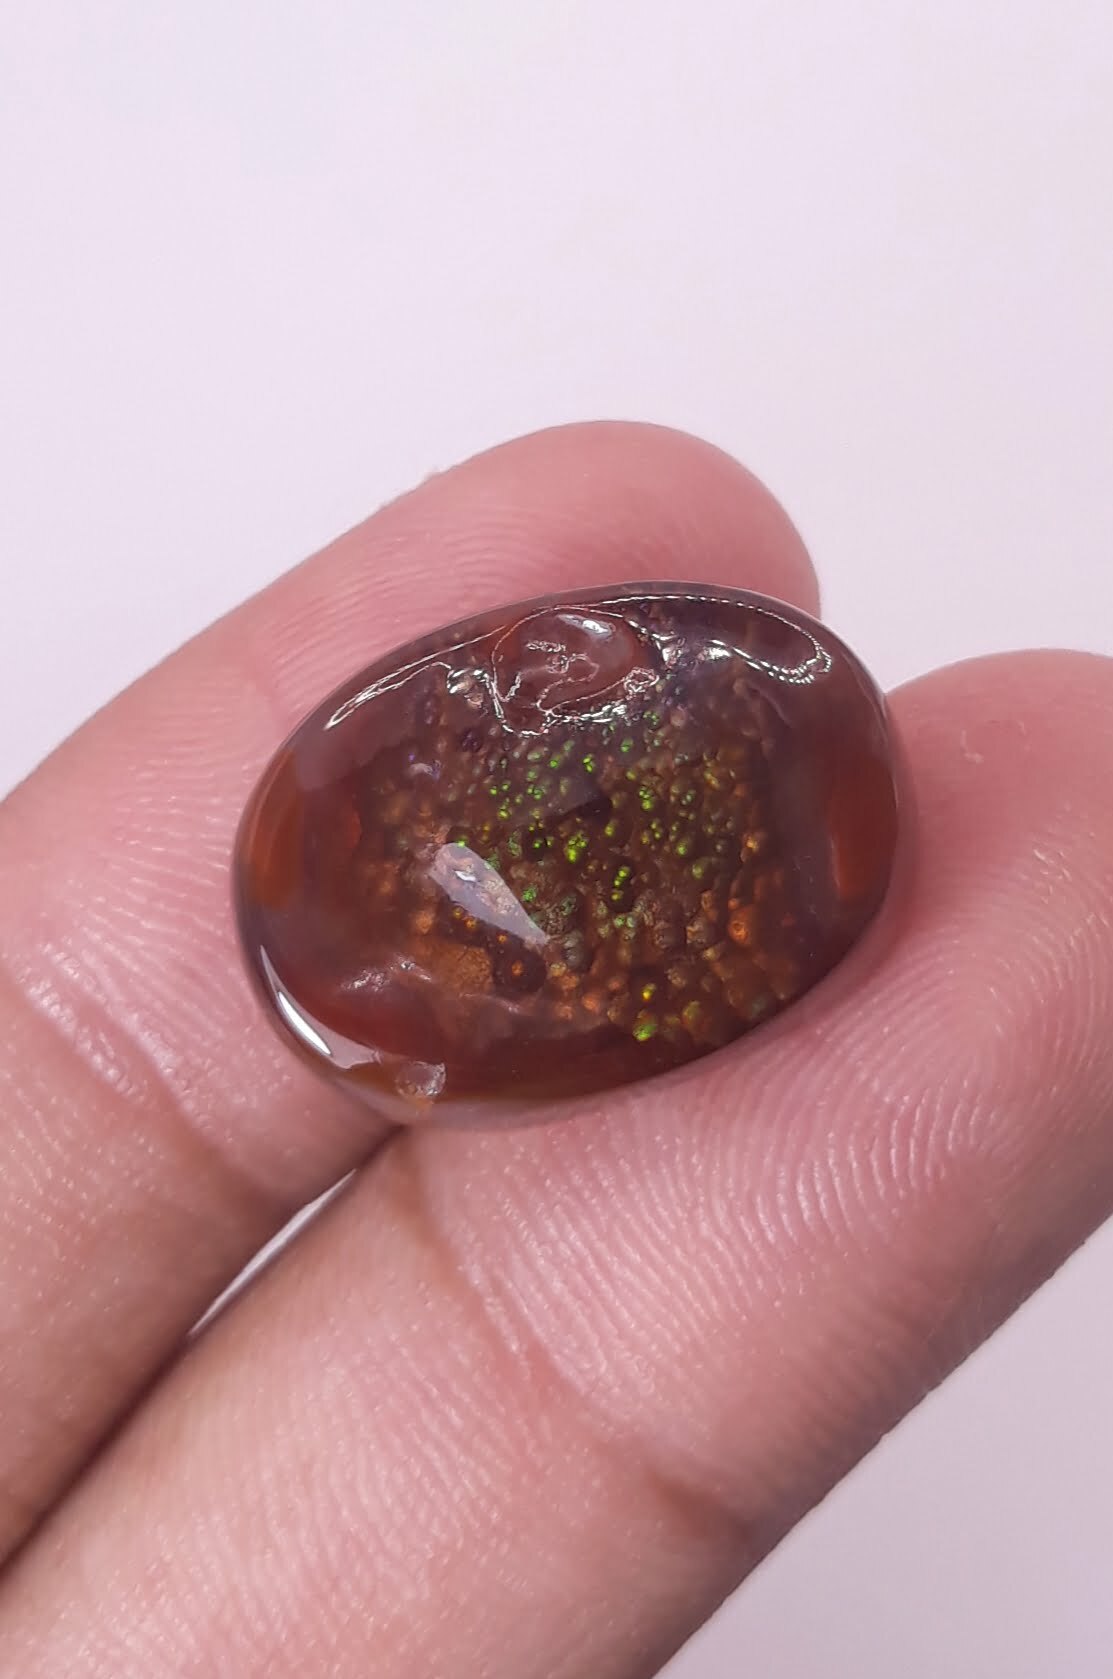 21.5ct Colorful Bubbly Fire Agate,  Rare Fire Agate - Perfect gemstone Gift, Rare Gemstone than Diamonds, Dimensions 21 x 16 mm